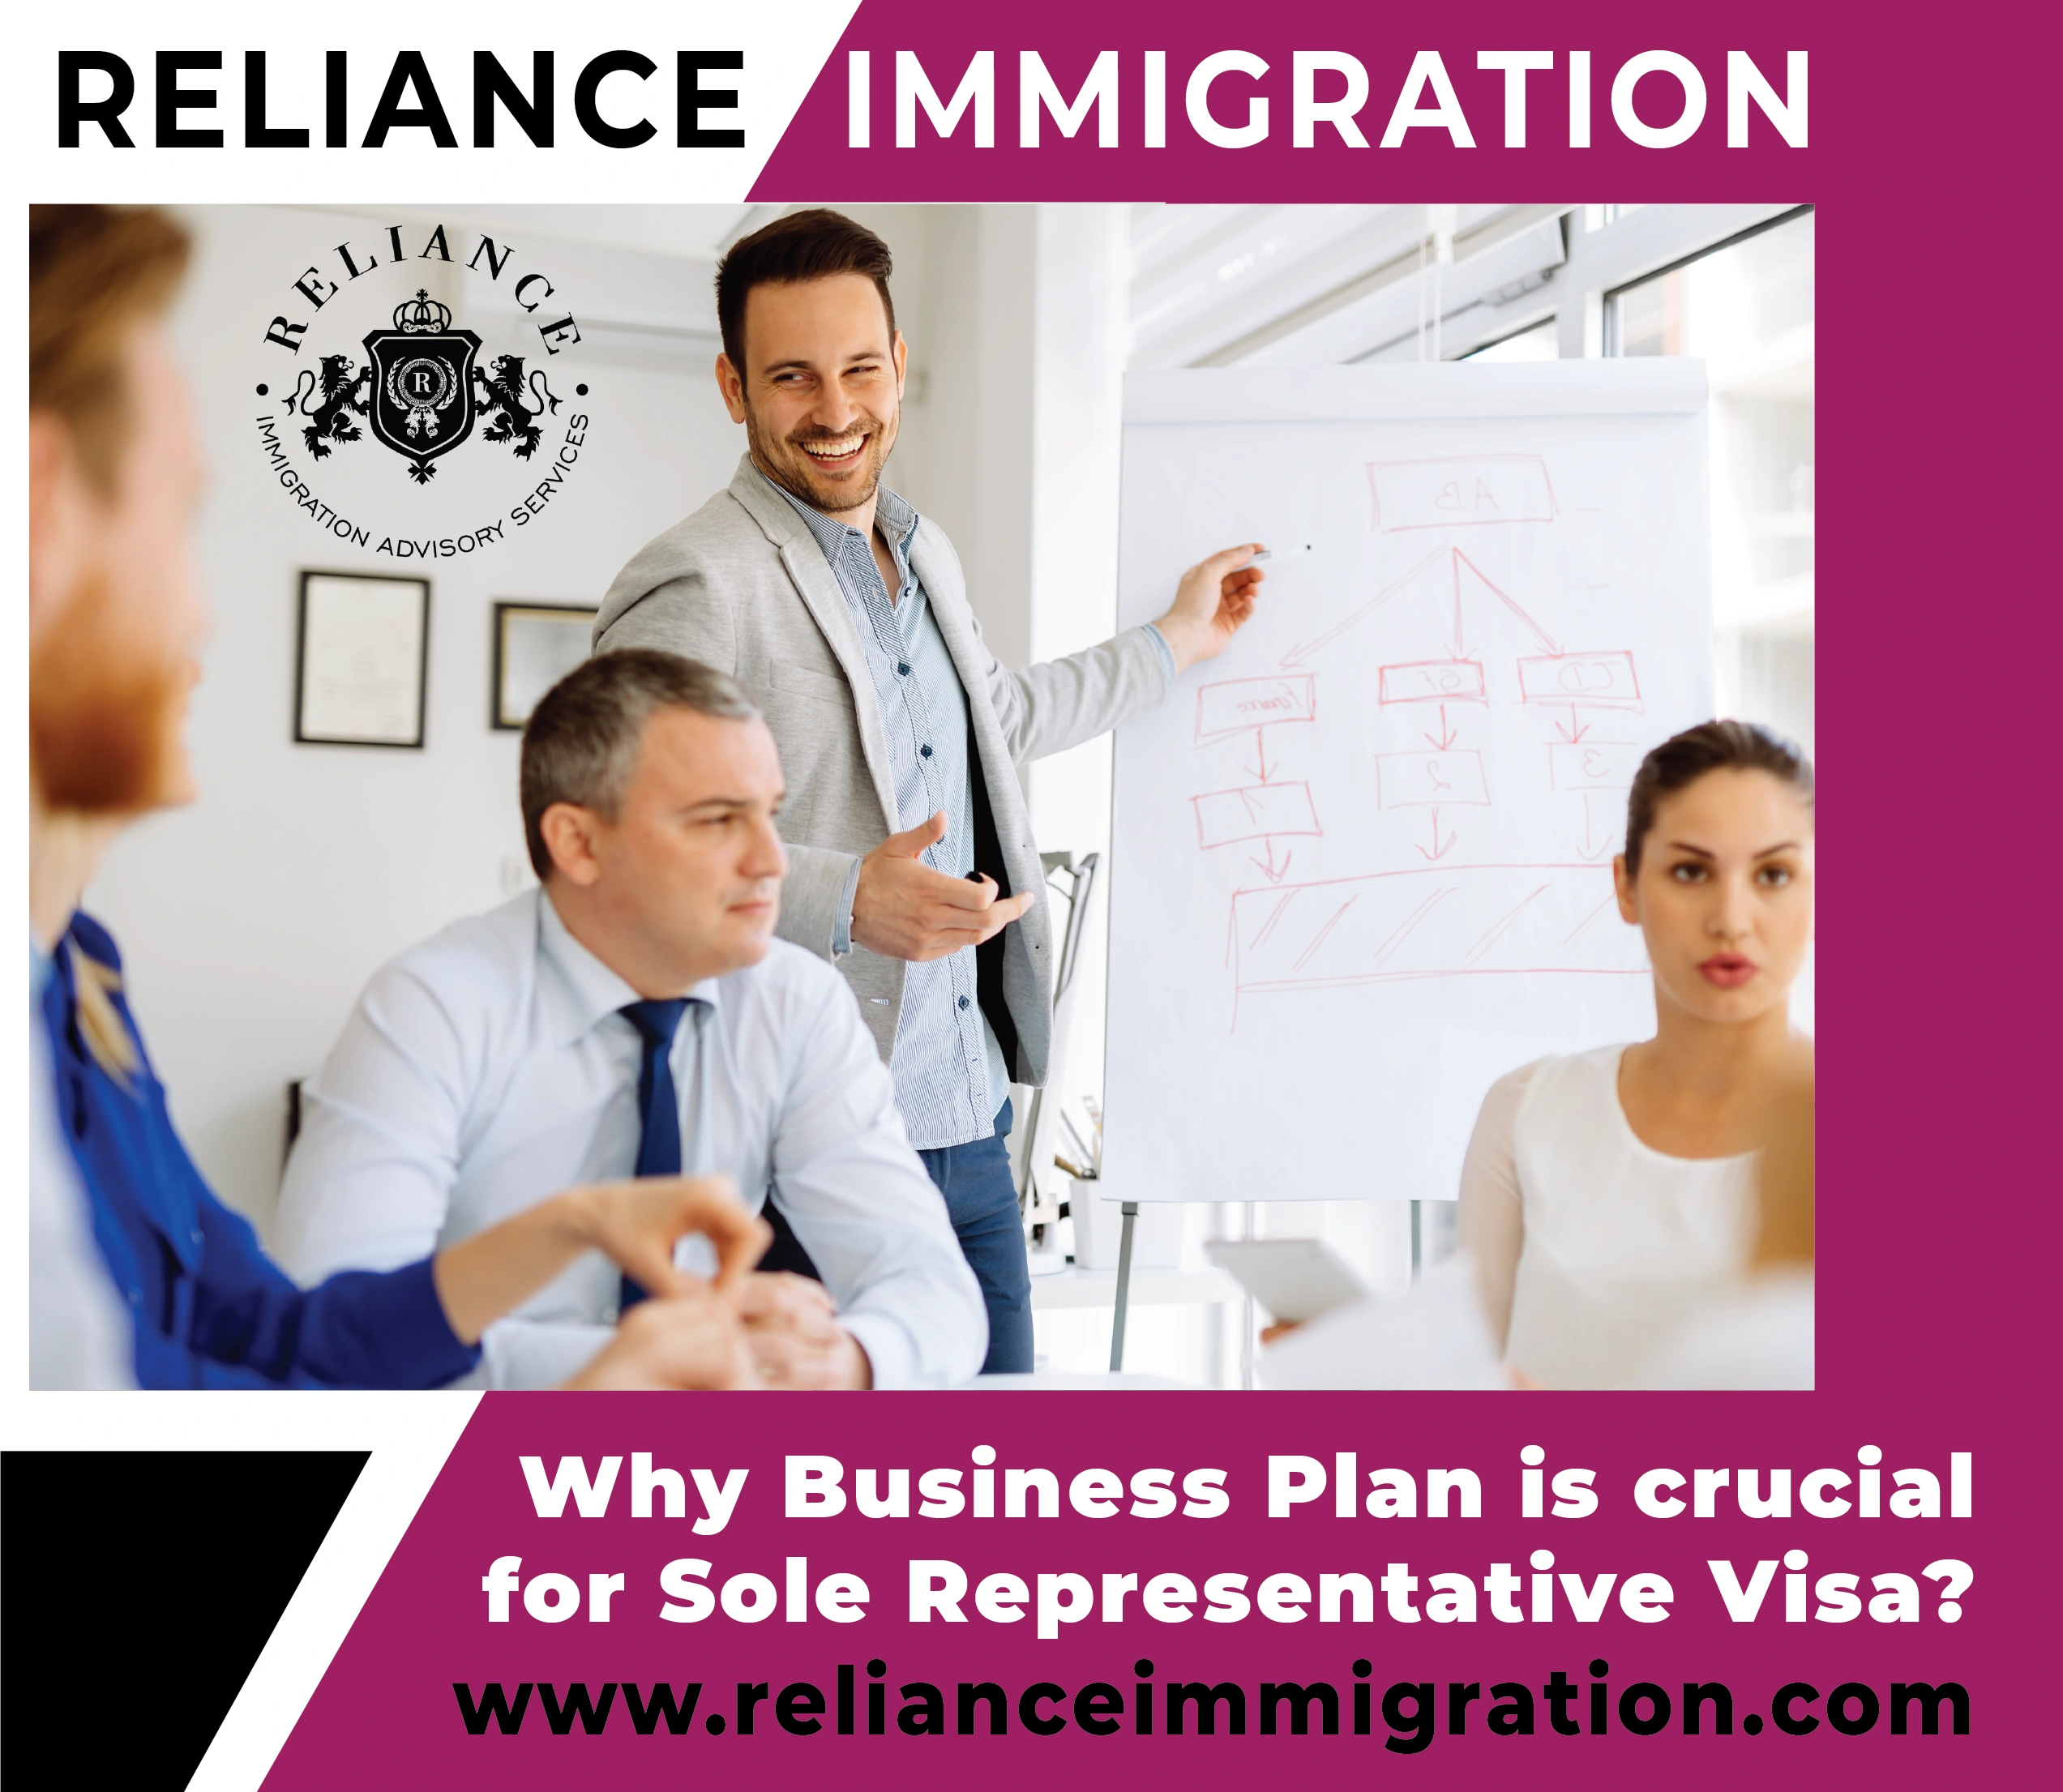 Sole Representative Visa is solely for the purpose of overseas Business wants to open a branch in UK